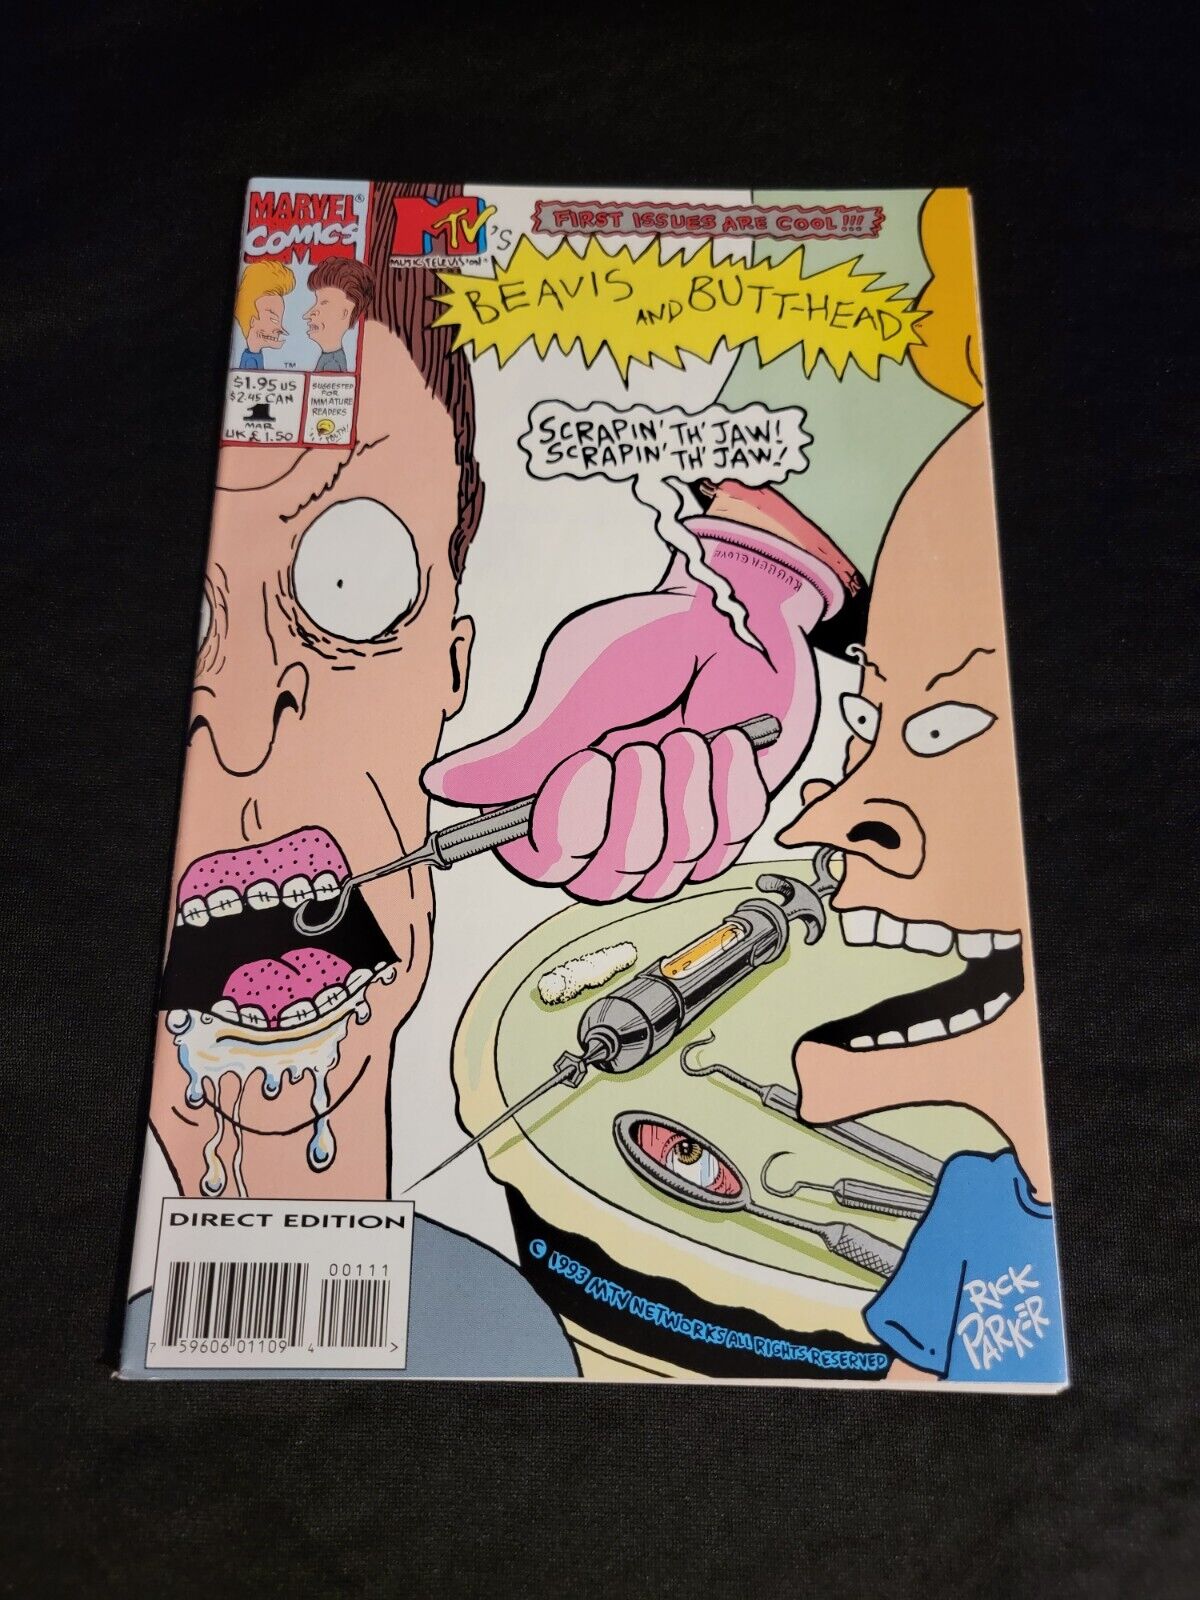 Beavis and Butthead Comic Book by Marvel Comics #1 First Issue 